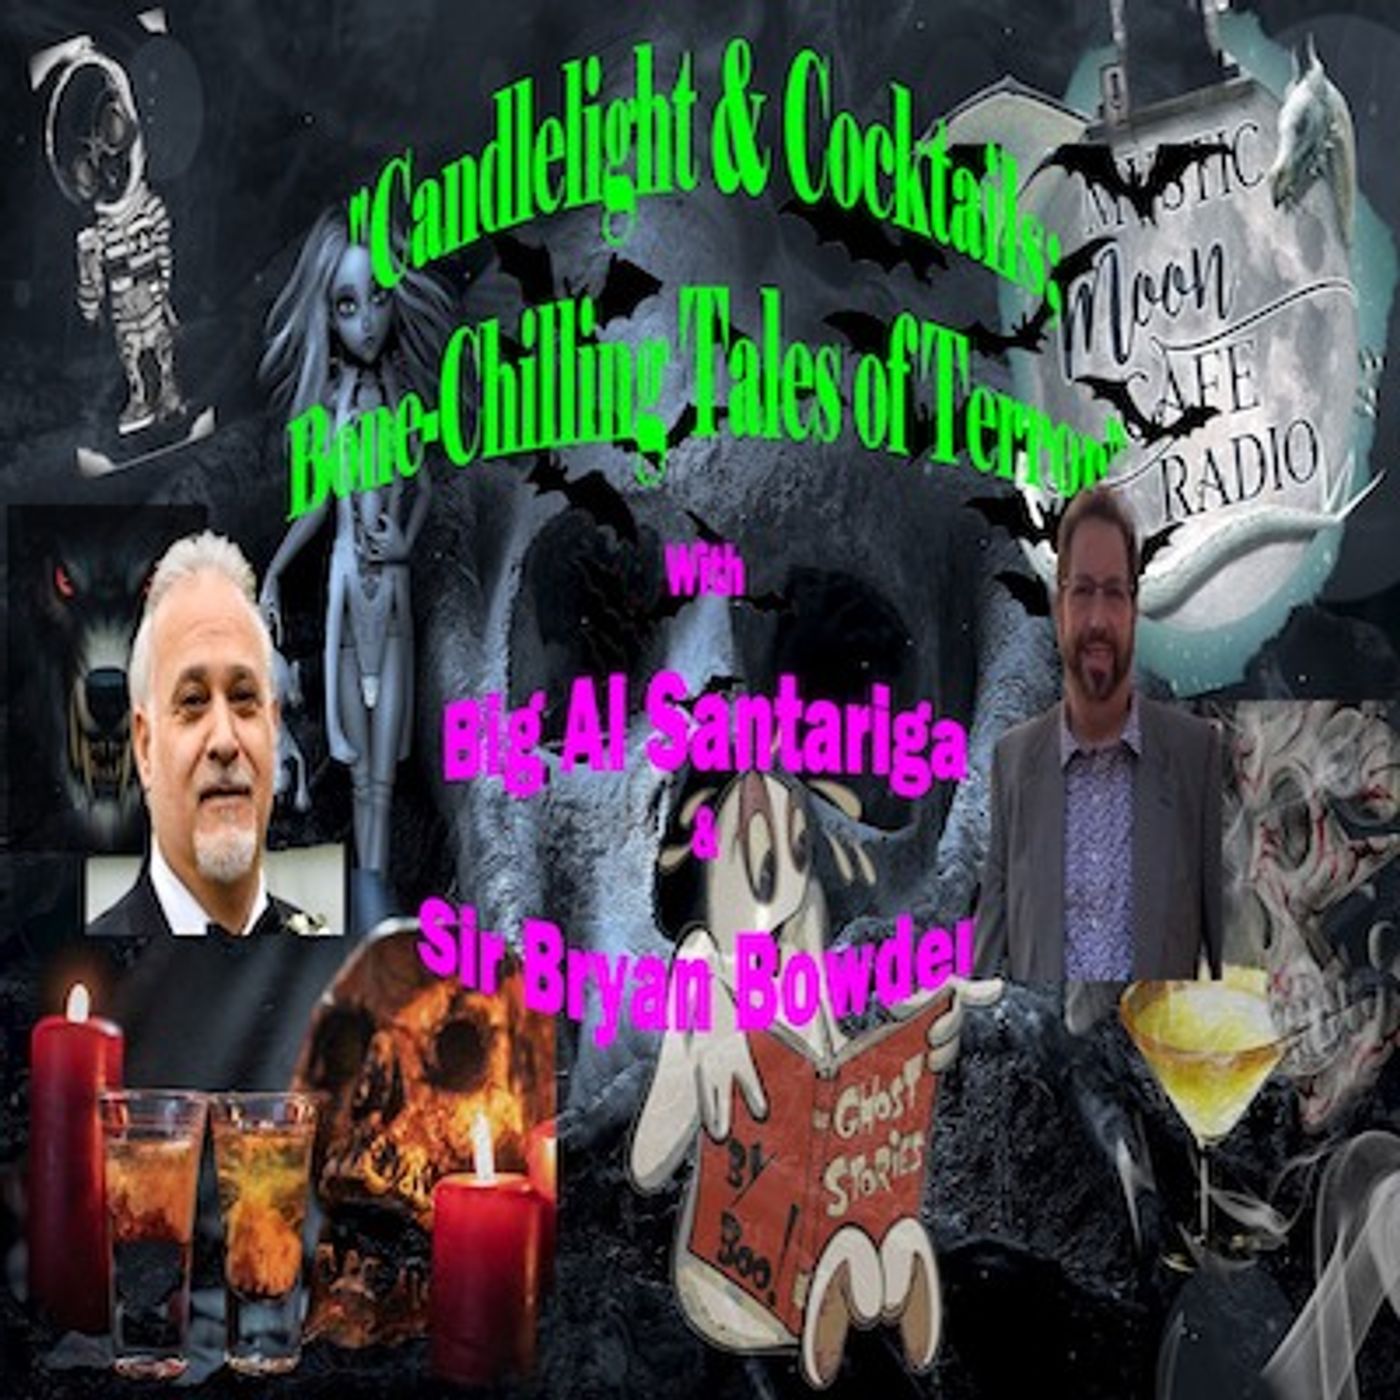 Candlelight & Cocktails: Bone Chilling Tales of Terror